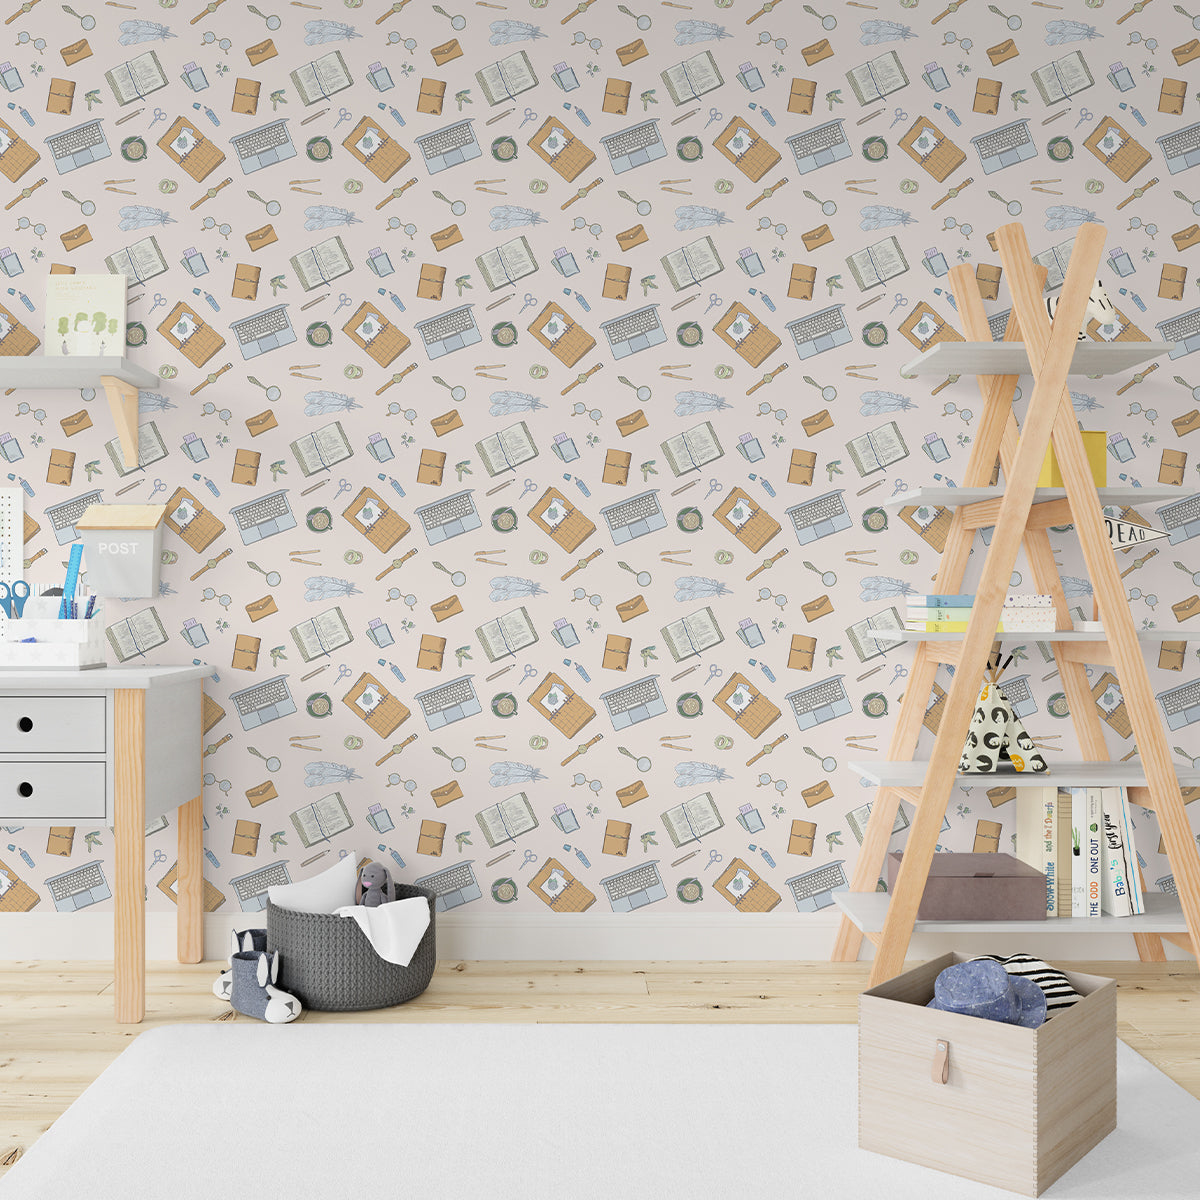 Exploration Station, Wallpaper Design for Rooms, Yellow